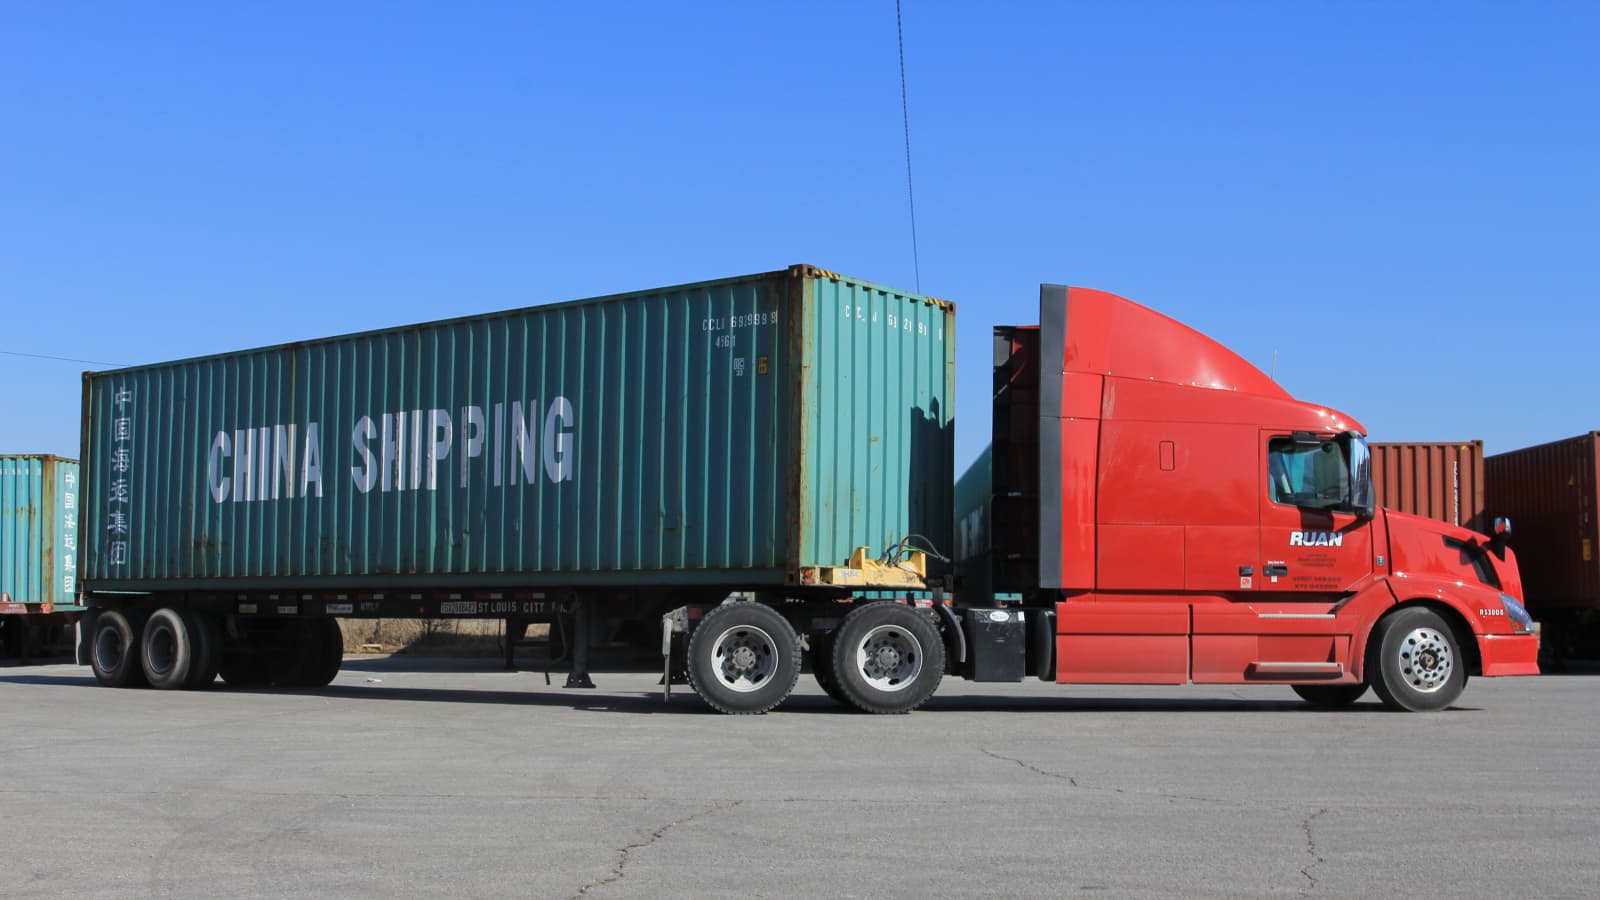 Is shipping and handling the same as the freight - corlettexpress